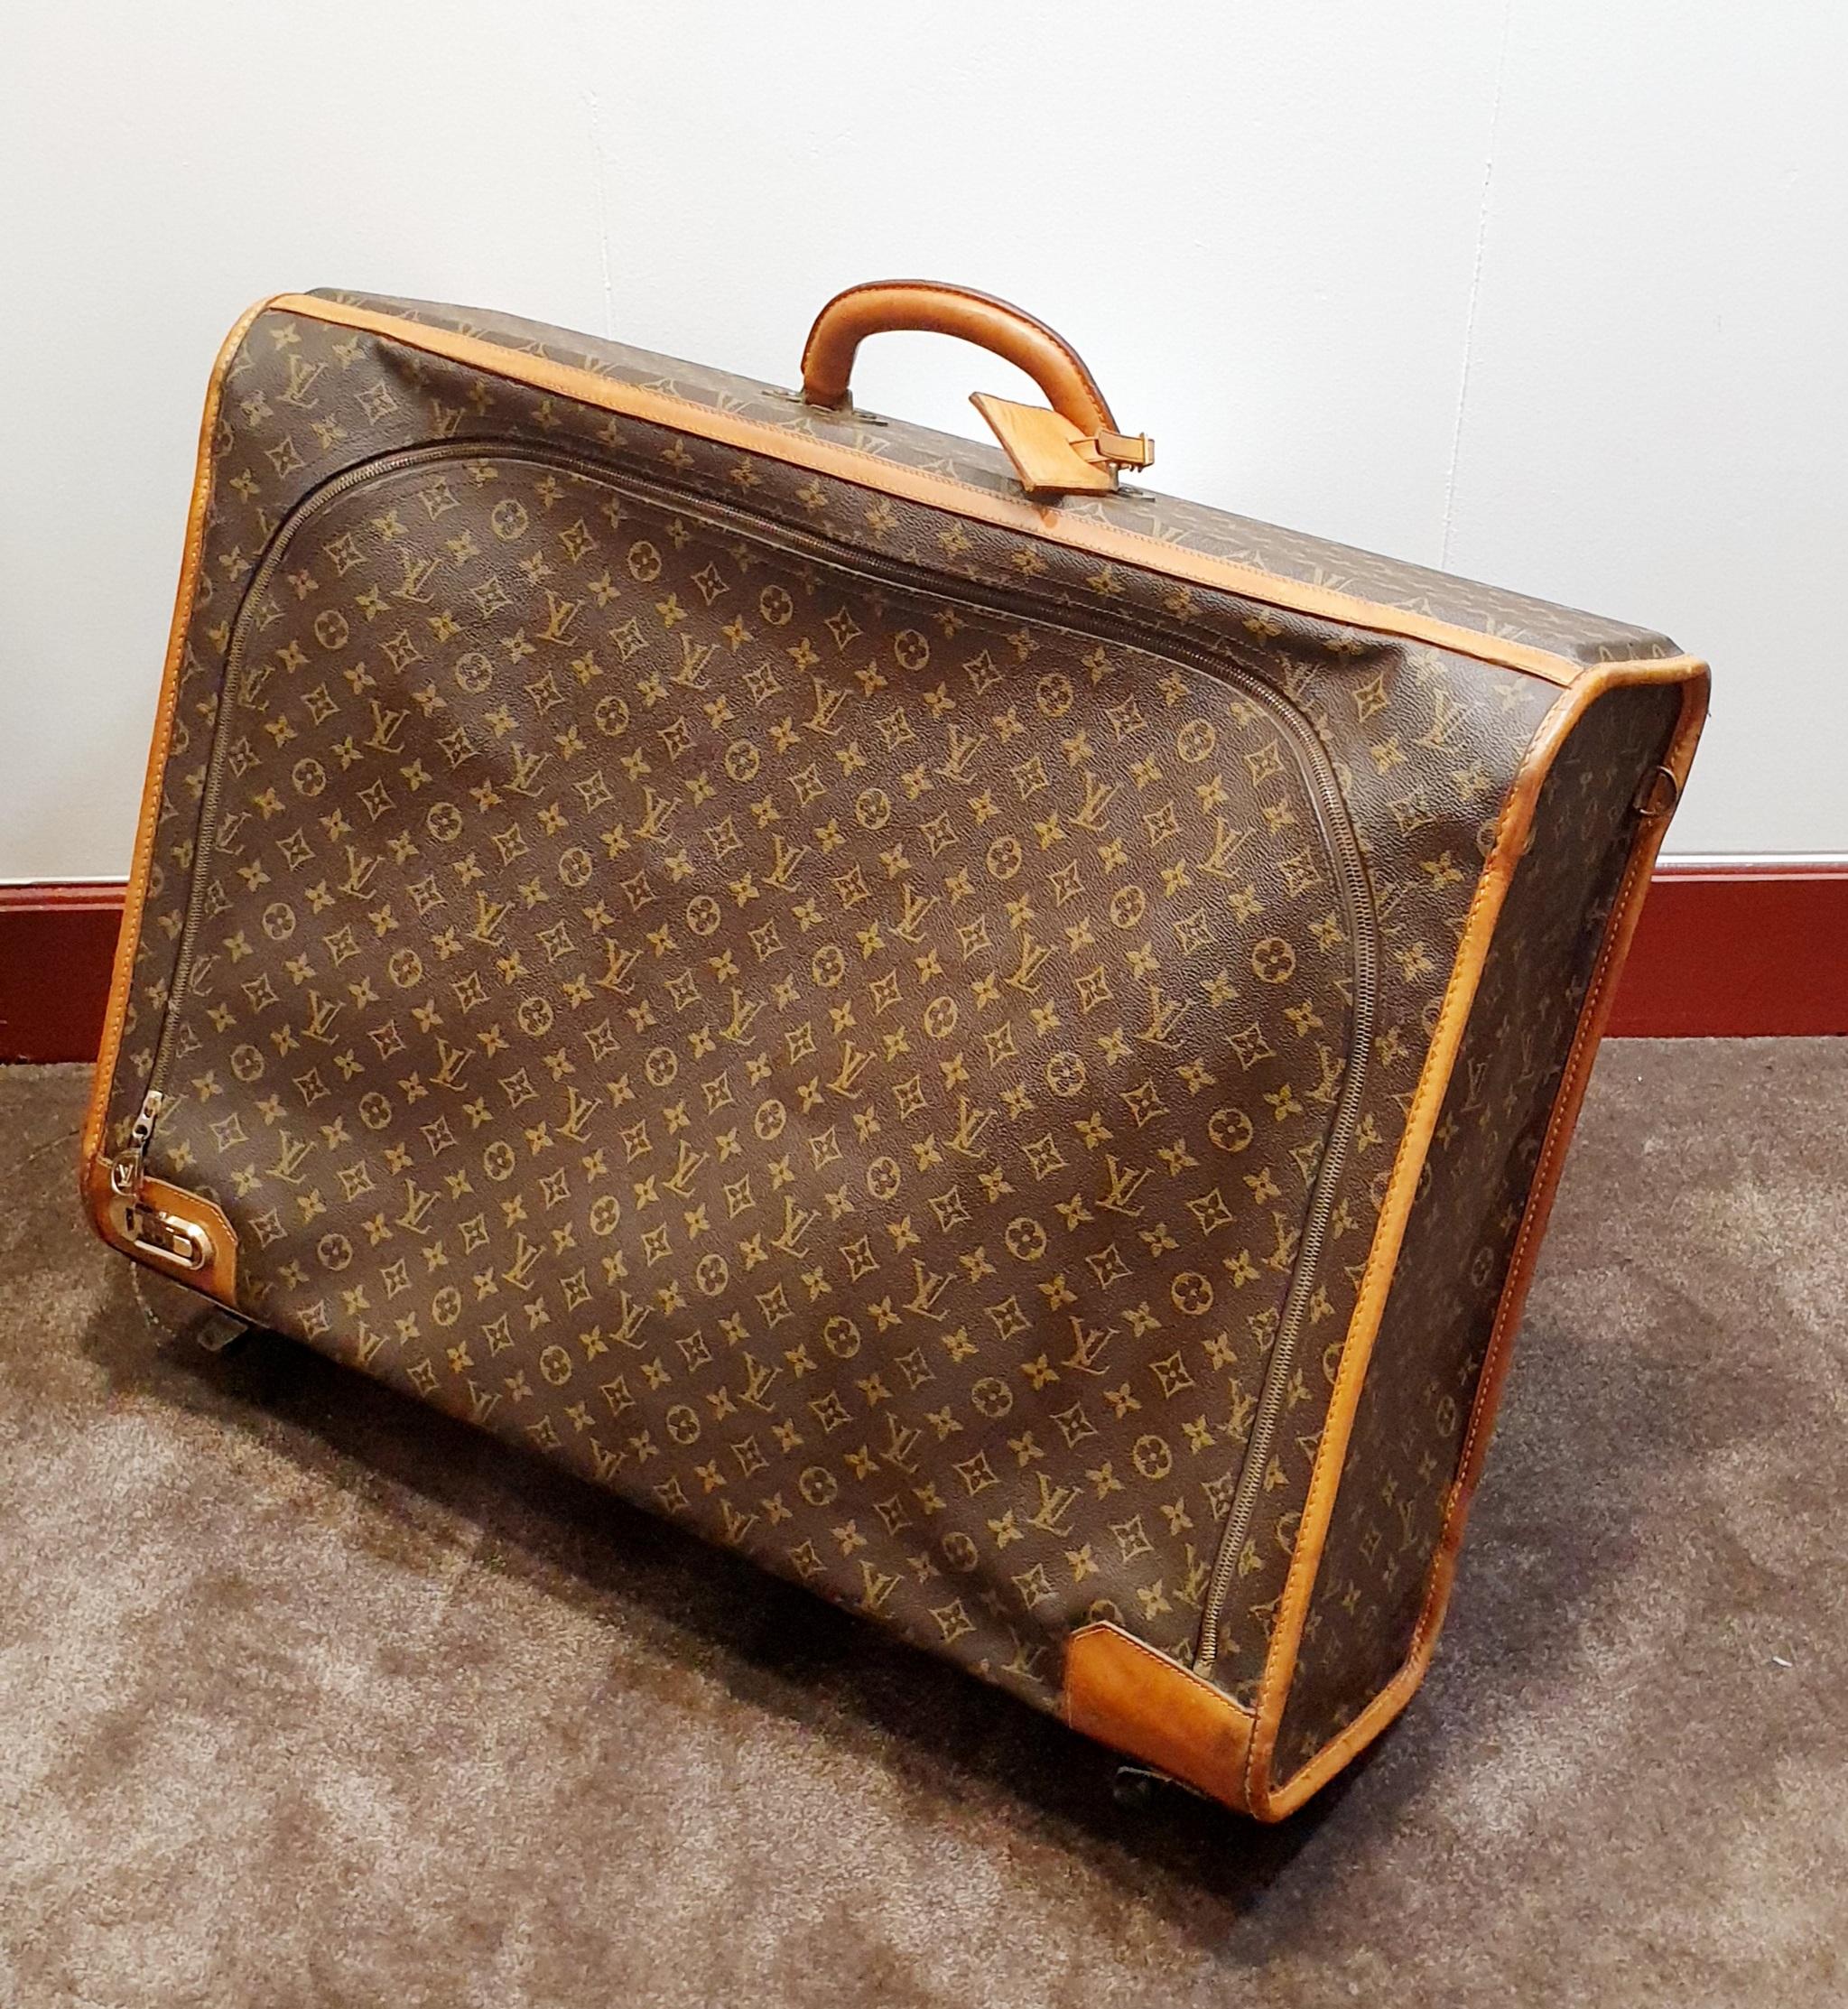 Vintage Louis Vuitton Canvas and Leather Travel Suitcase
Height x Lenght  75 x 56 x 23 / 29,52 x 22,04 X 9,05 inches
Height hand handle 25cm / 9,82 inches

This elegant oversized soft suitcase features a Louis Vuitton monogram on toile canvas. The